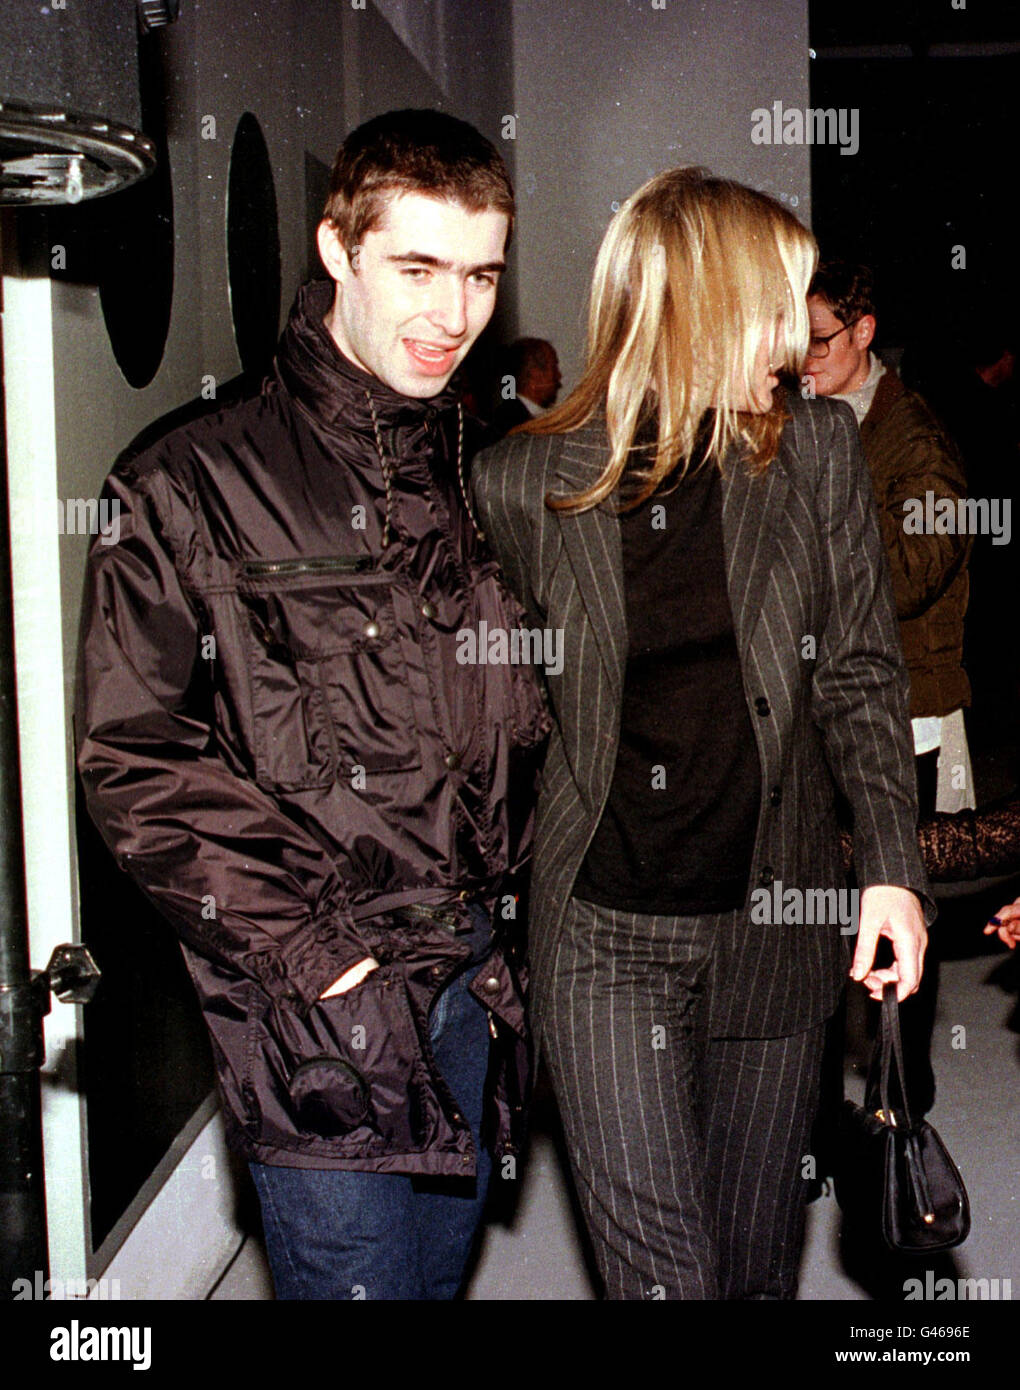 OASIS SINGER LIAM GALLAGHER AND HIS FIANCE PATSY KENSIT ARRIVE AT THE SAATCHI GALLERY IN LONDON FOR THE WAR CHILD CHARITY AUCTION. Stock Photo